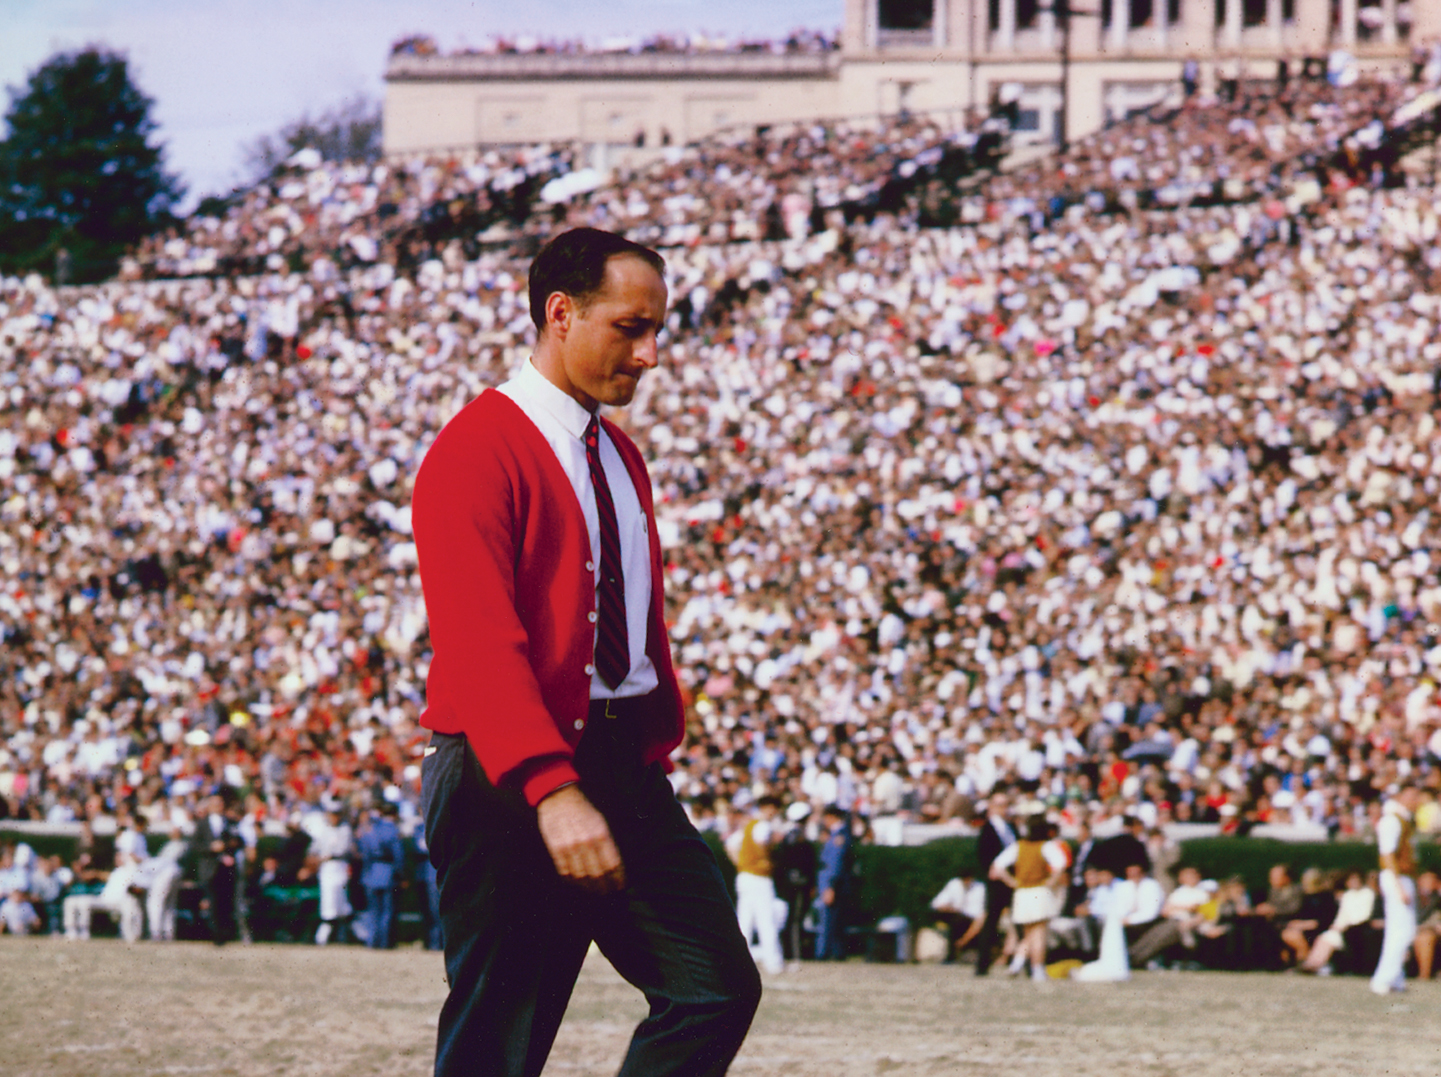 Life is a masterpiece: The Vince Dooley story